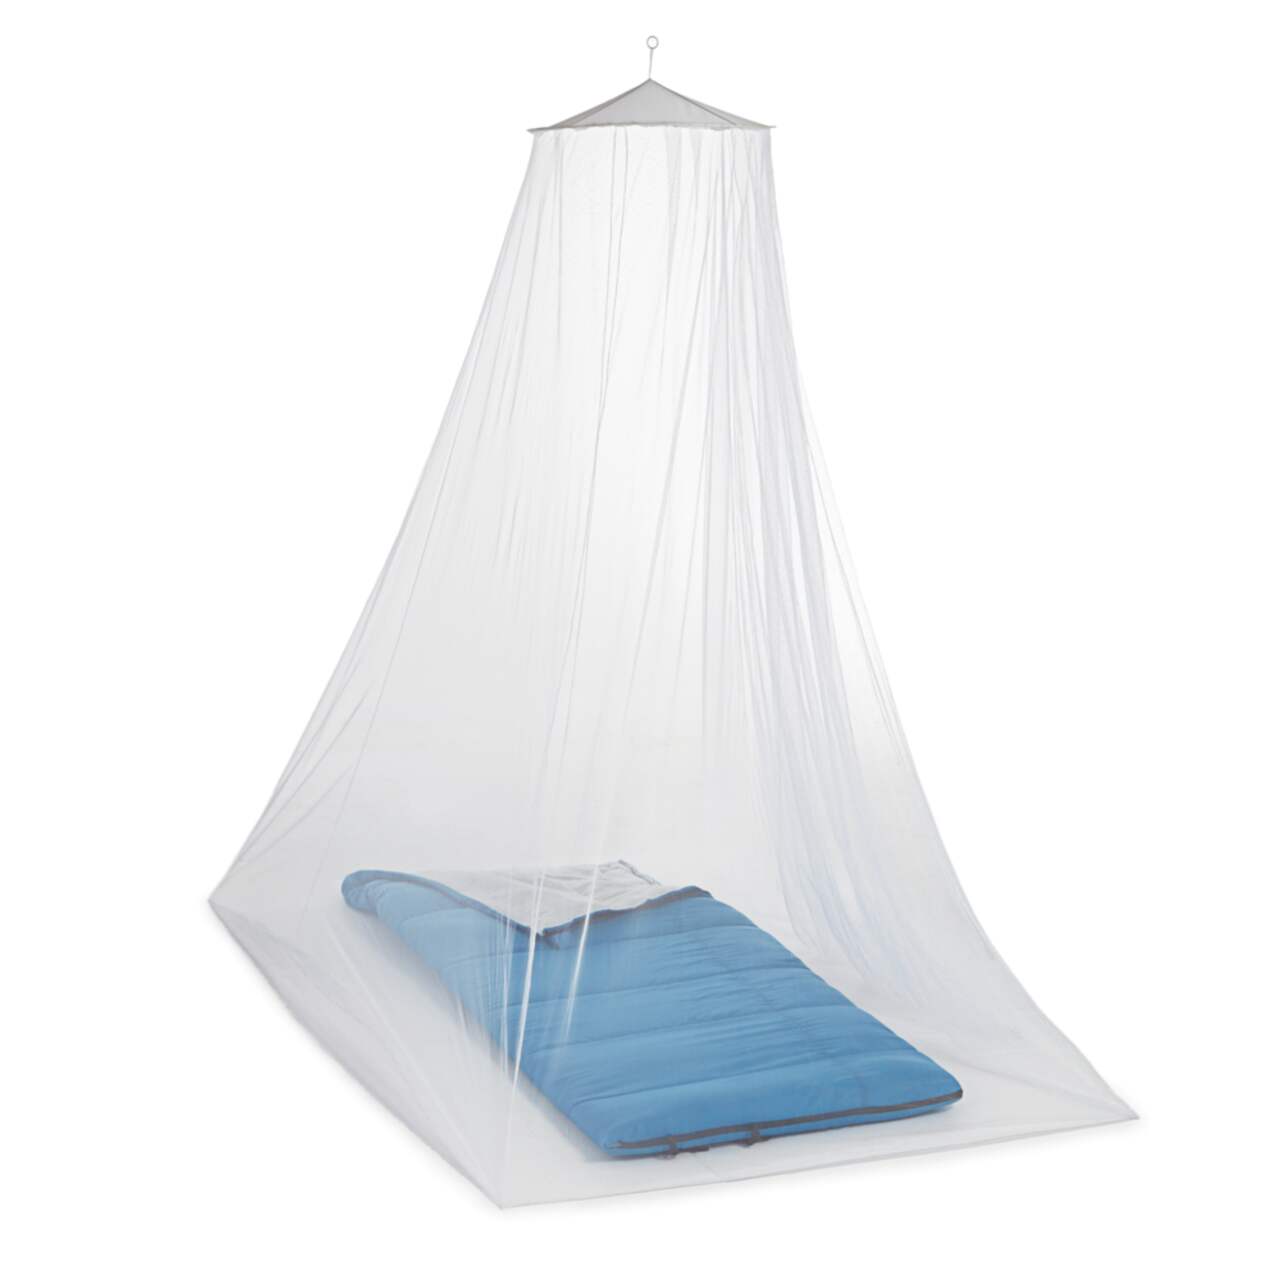 https://media-www.canadiantire.ca/product/playing/camping/camping-accessories/0765657/woods-pop-up-net-b29d0738-68ad-4394-a11f-22b2087c0773.png?imdensity=1&imwidth=640&impolicy=mZoom